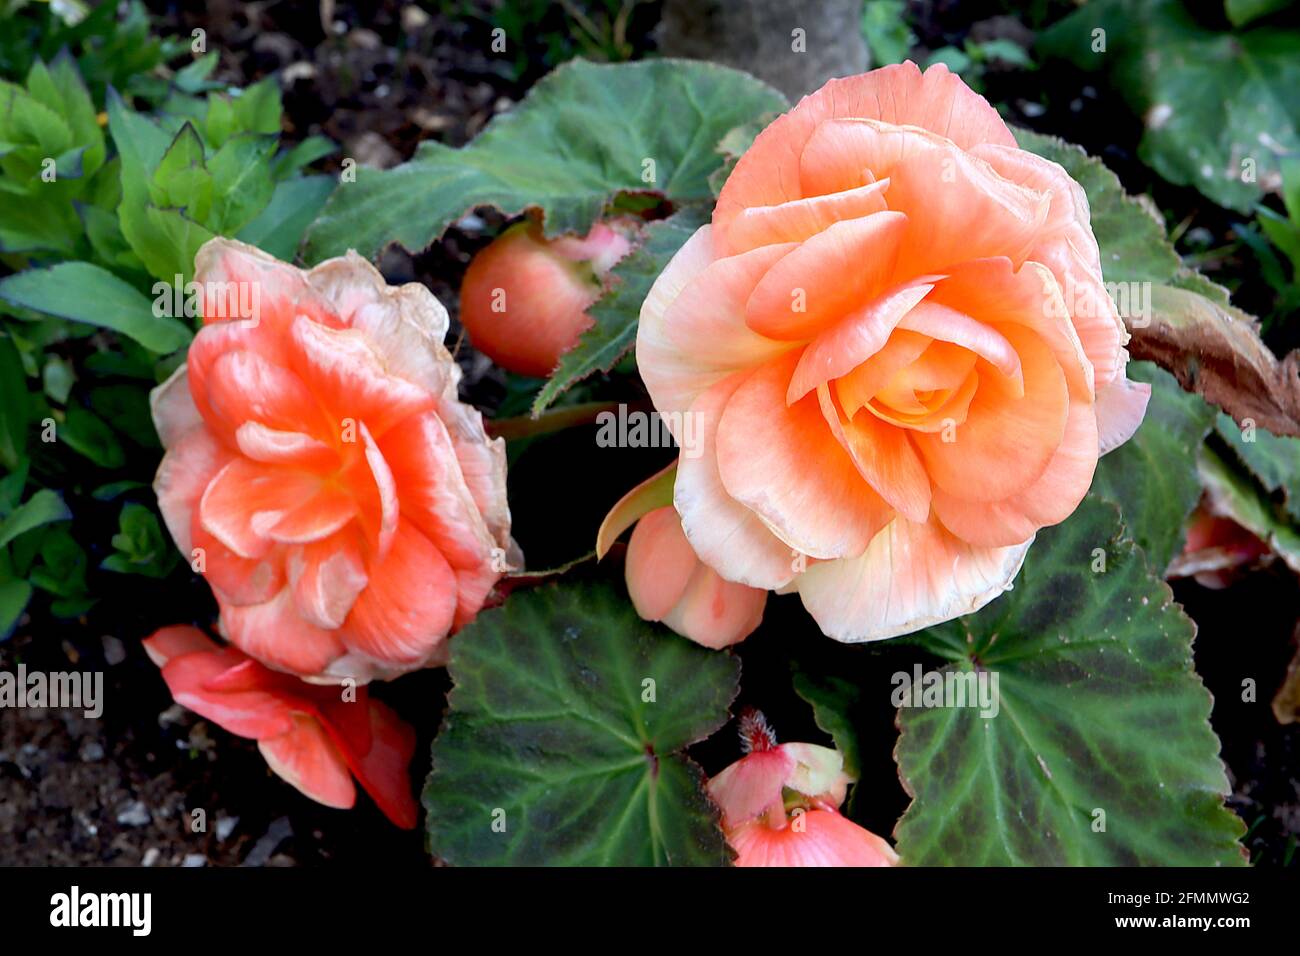 Begonia ‘Fortune Coral Shades’ Begonia Fortune Peach Shades coral peach flowers in roseform shape,  May, England, UK Stock Photo